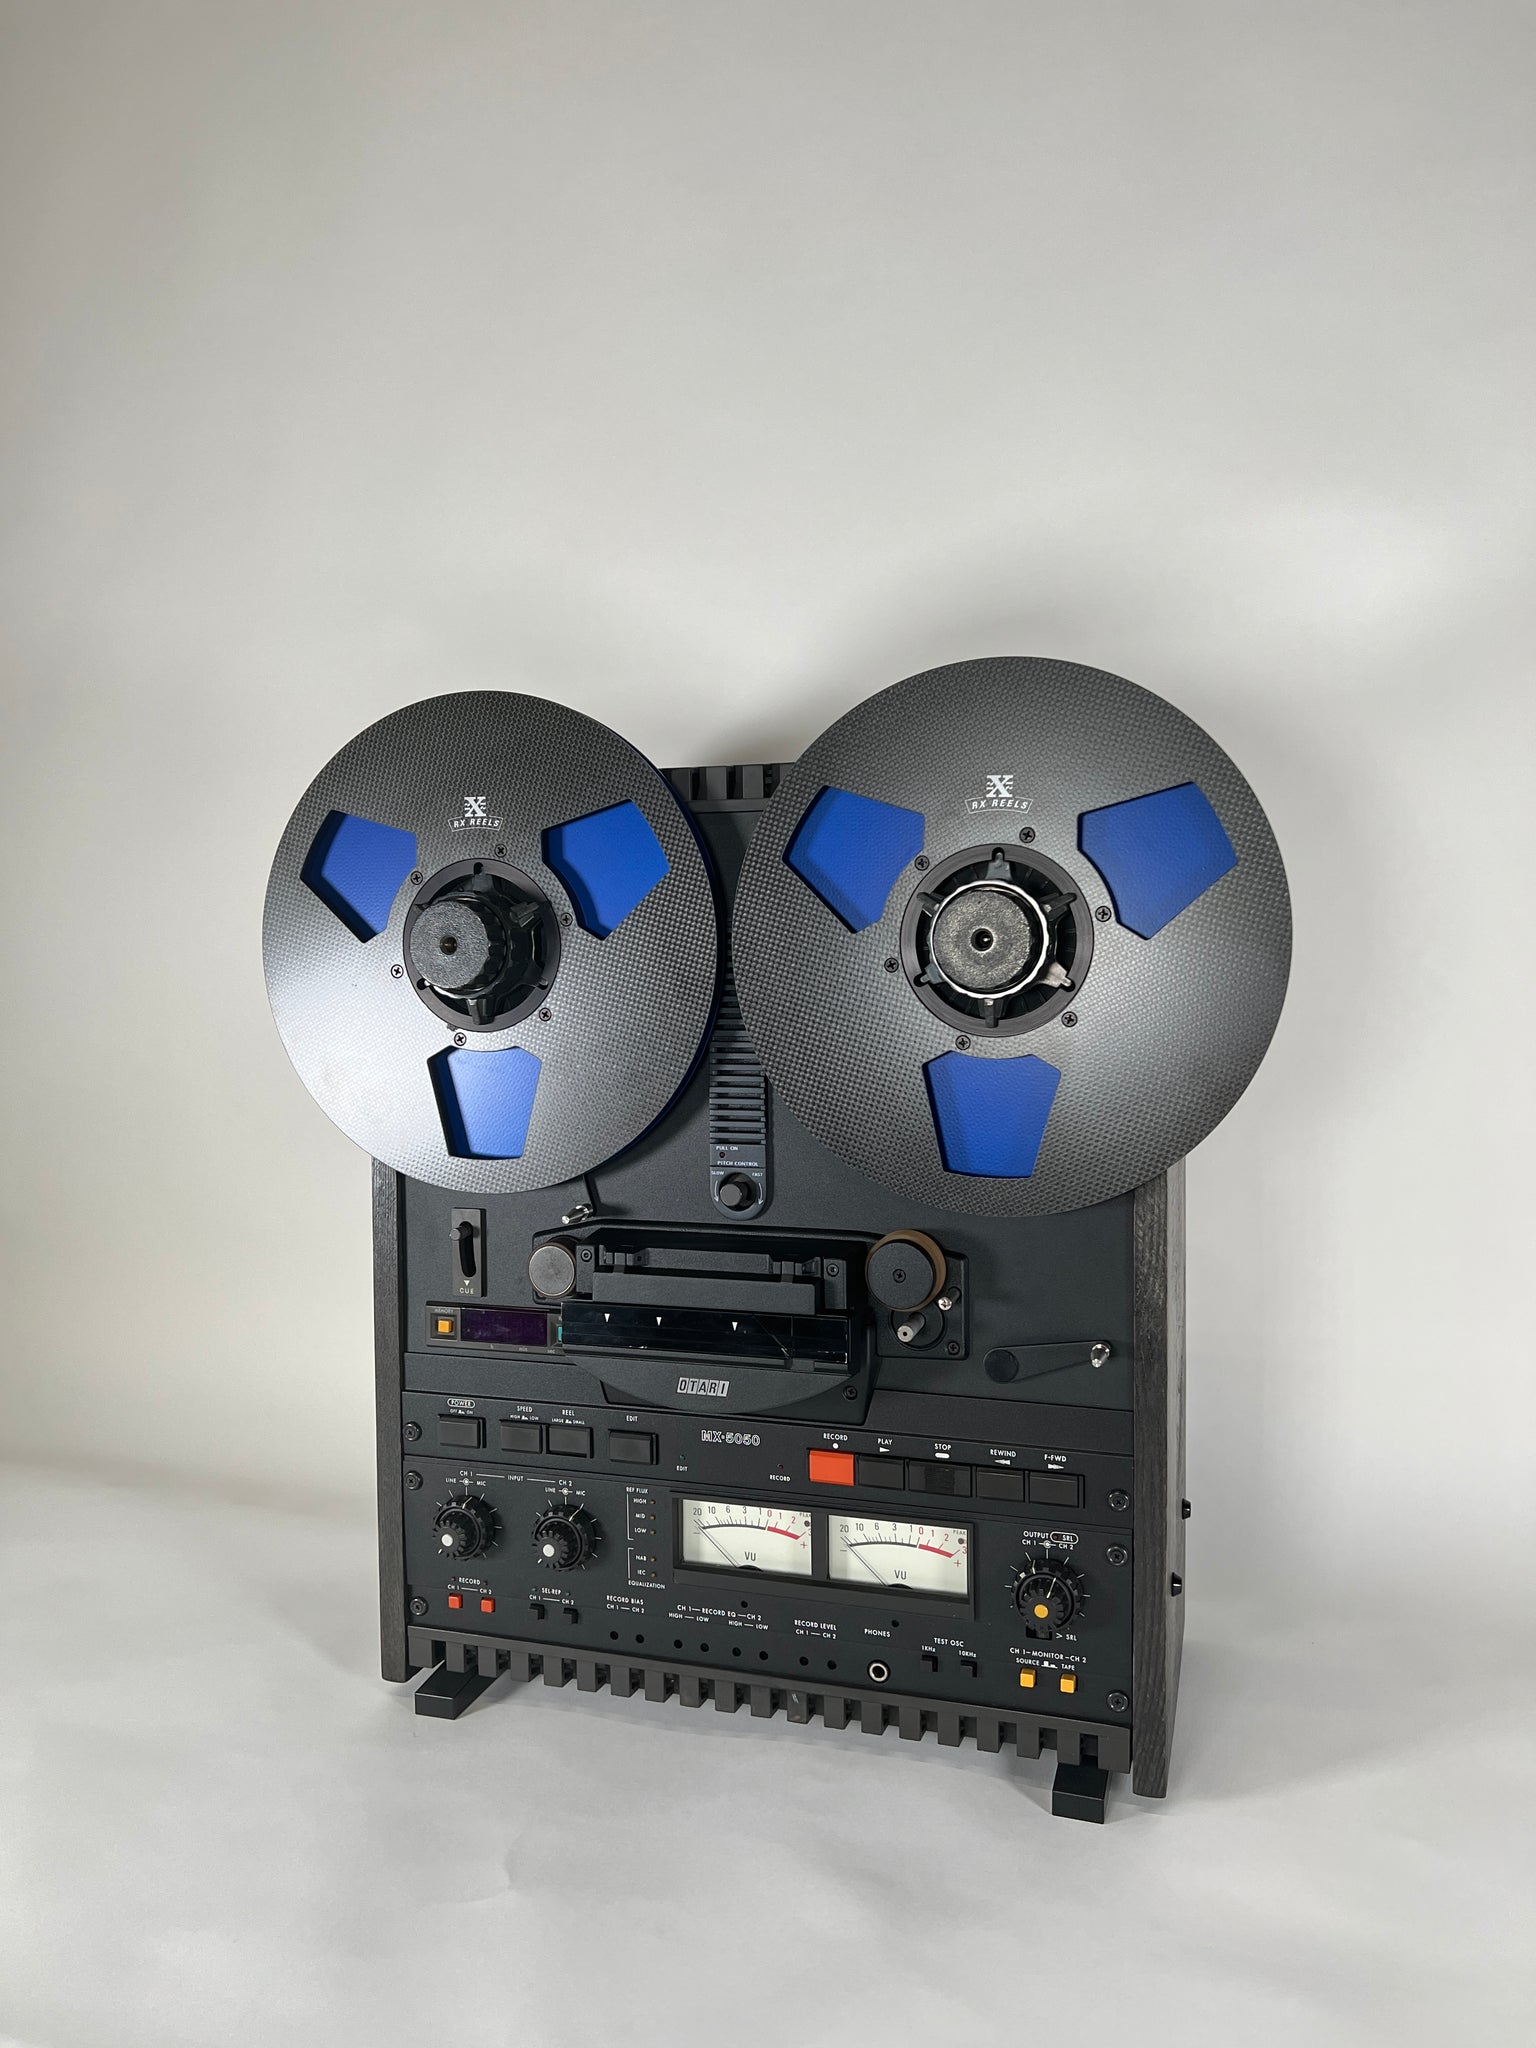 Otari MX-5050 Commercial Reel To Reel Tape Deck with rack mount RTR